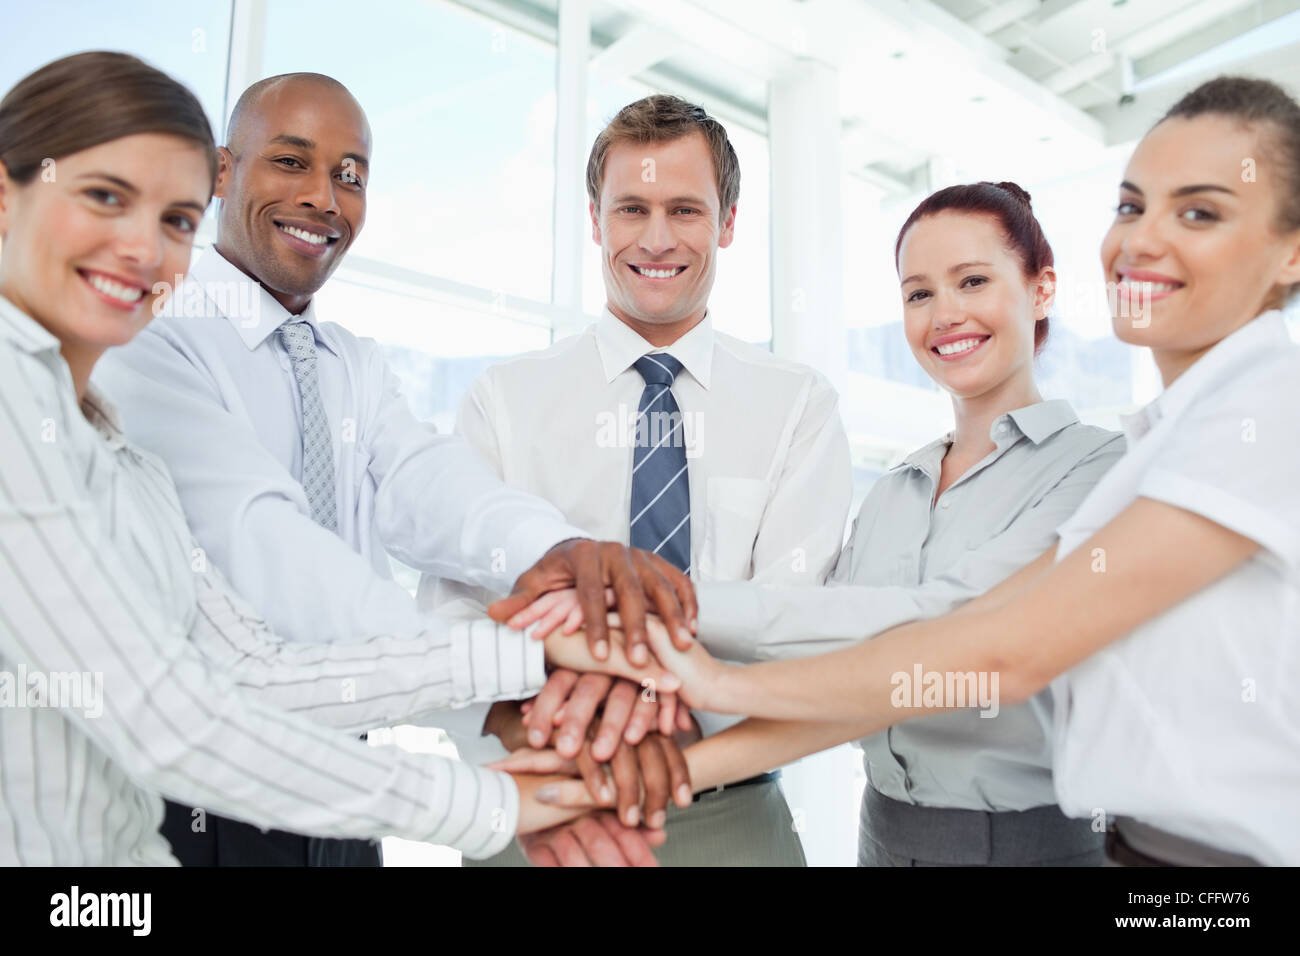 Smiling Business team doing teamwork gesture Stock Photo